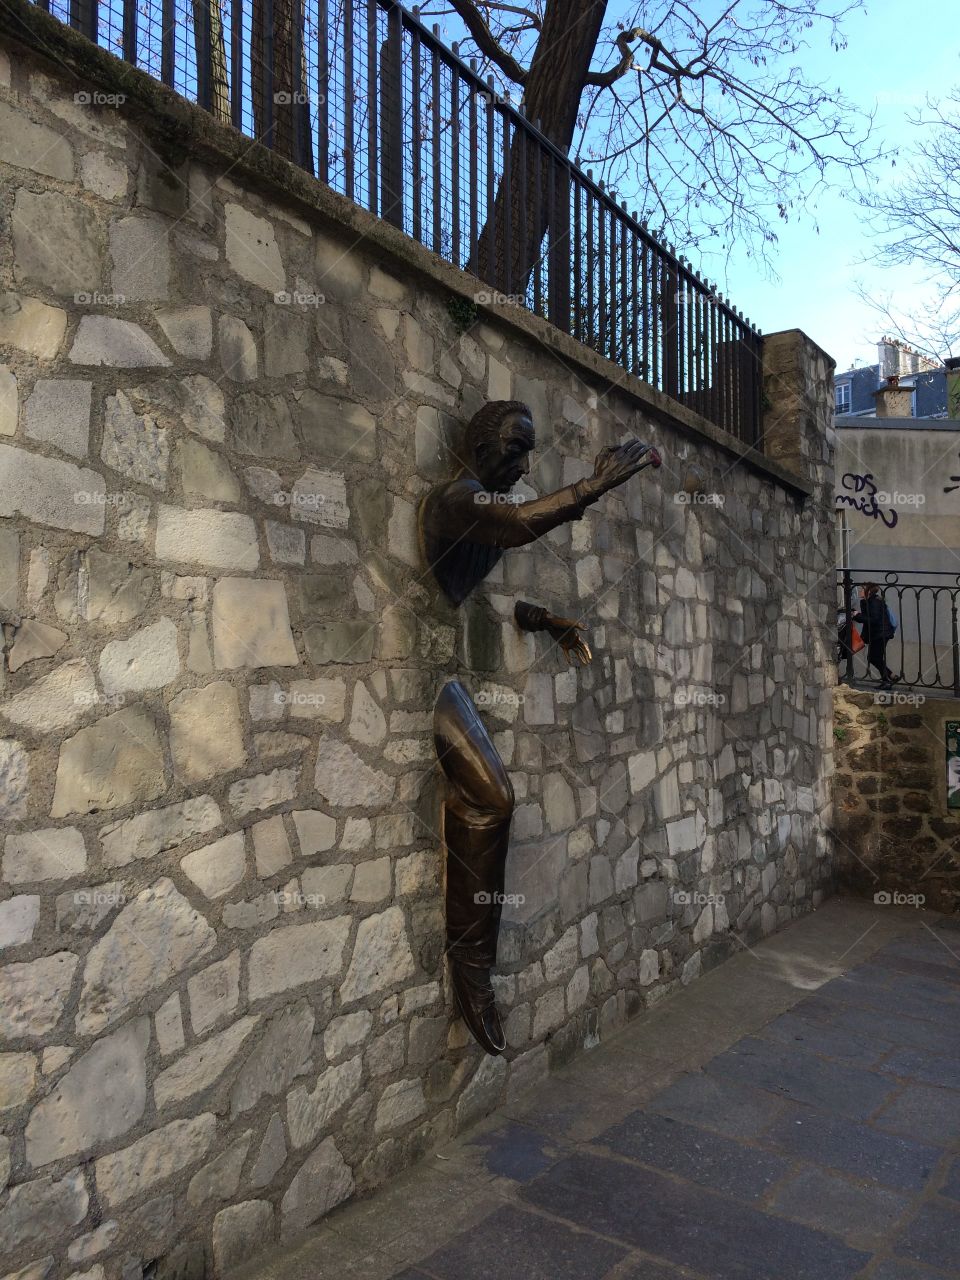 Trapped in the wall. Montmartre in Paris, France